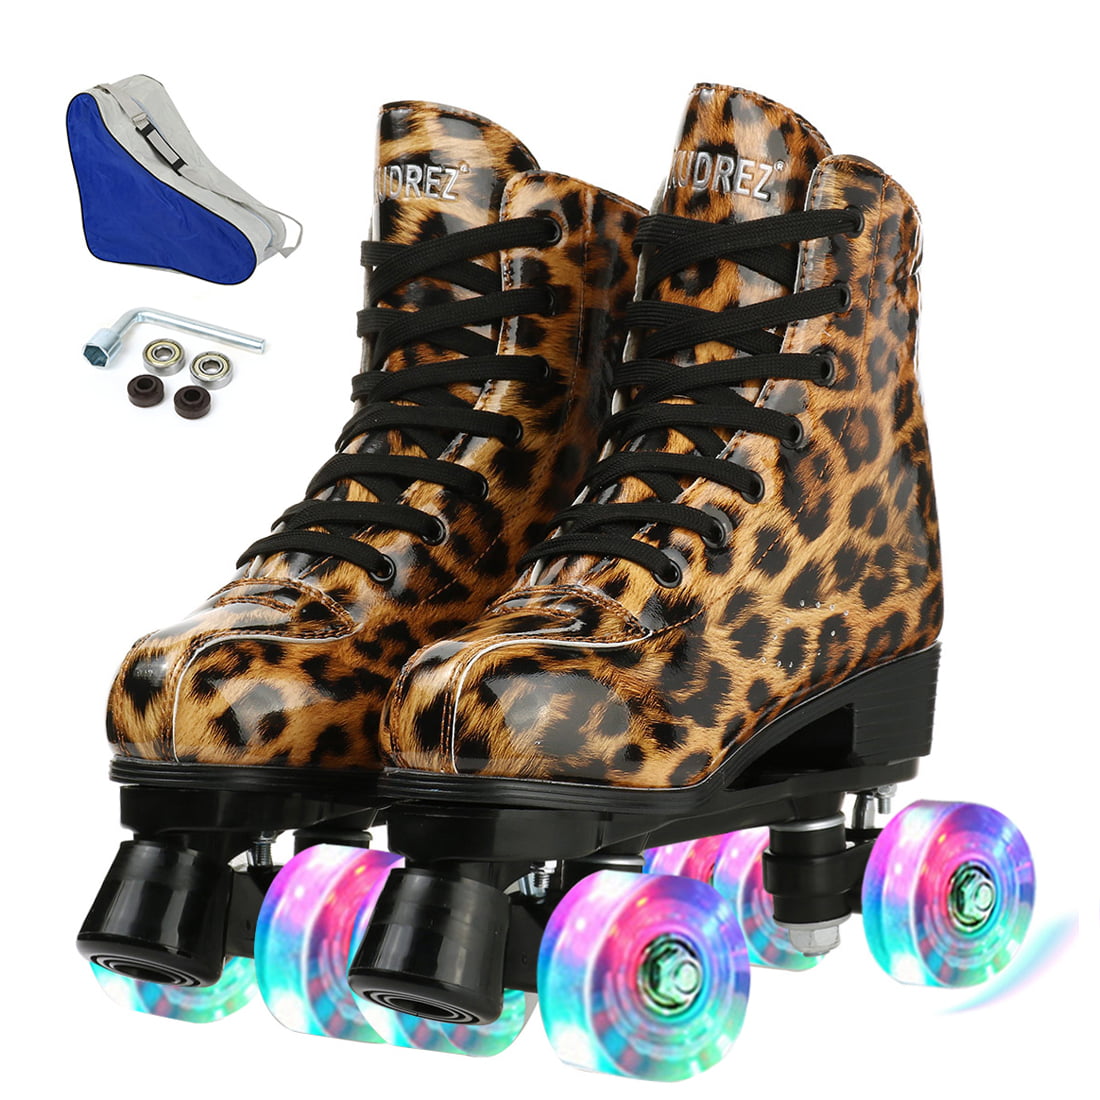 Double-wheeled casual shoes swivel four-wheel double-purpose inline skates shoes 